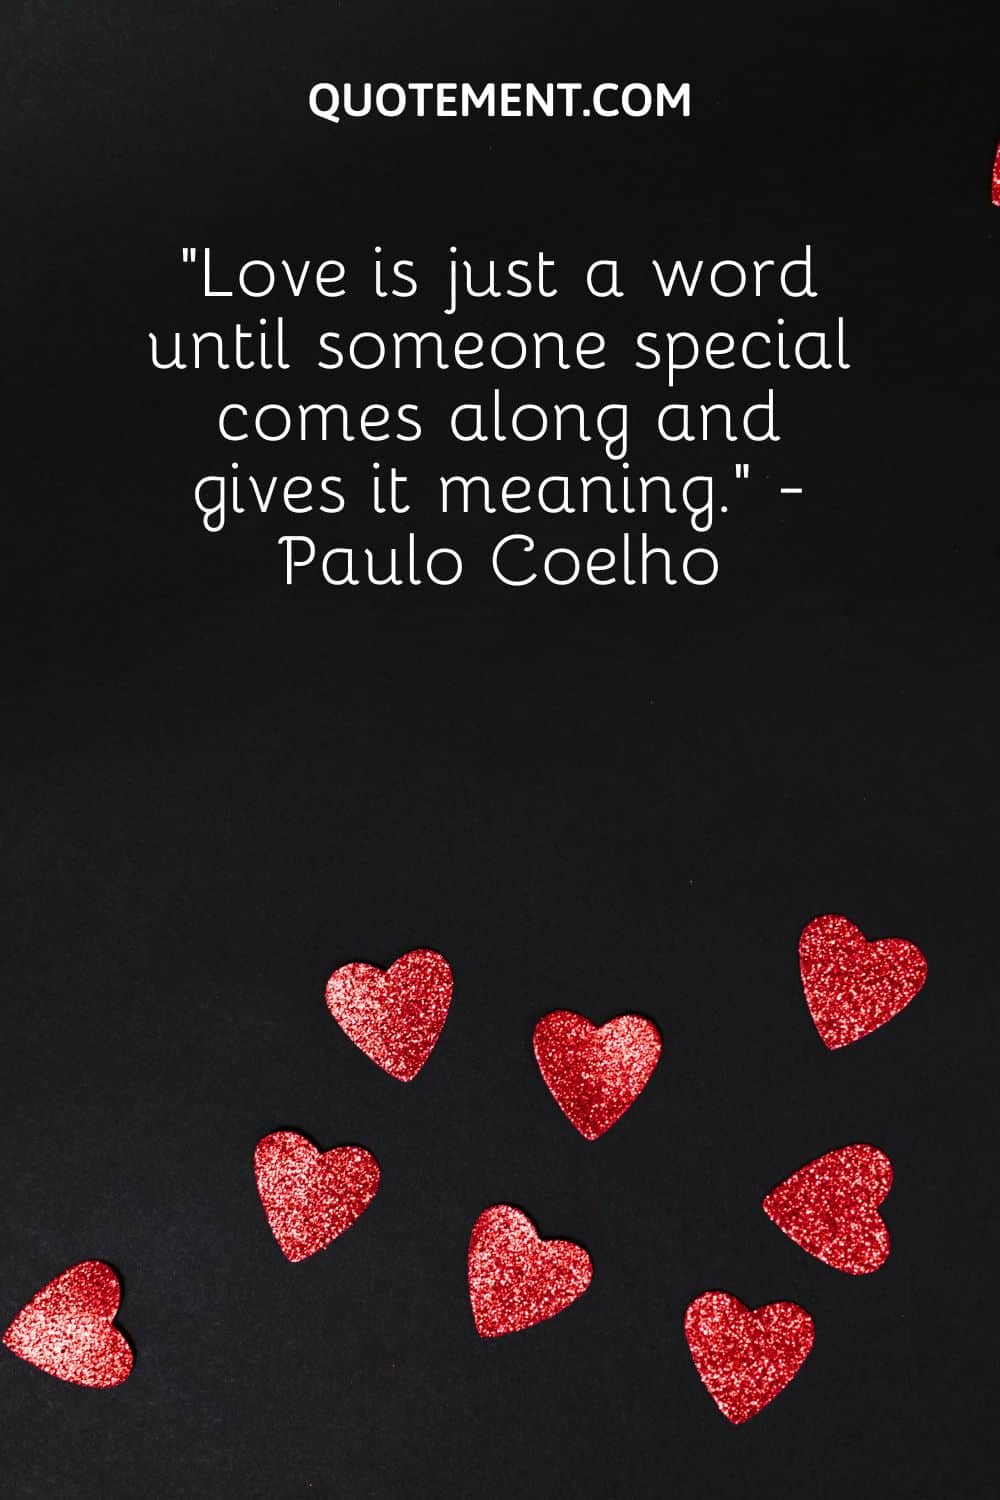 “Love is just a word until someone special comes along and gives it meaning.” - Paulo Coelho